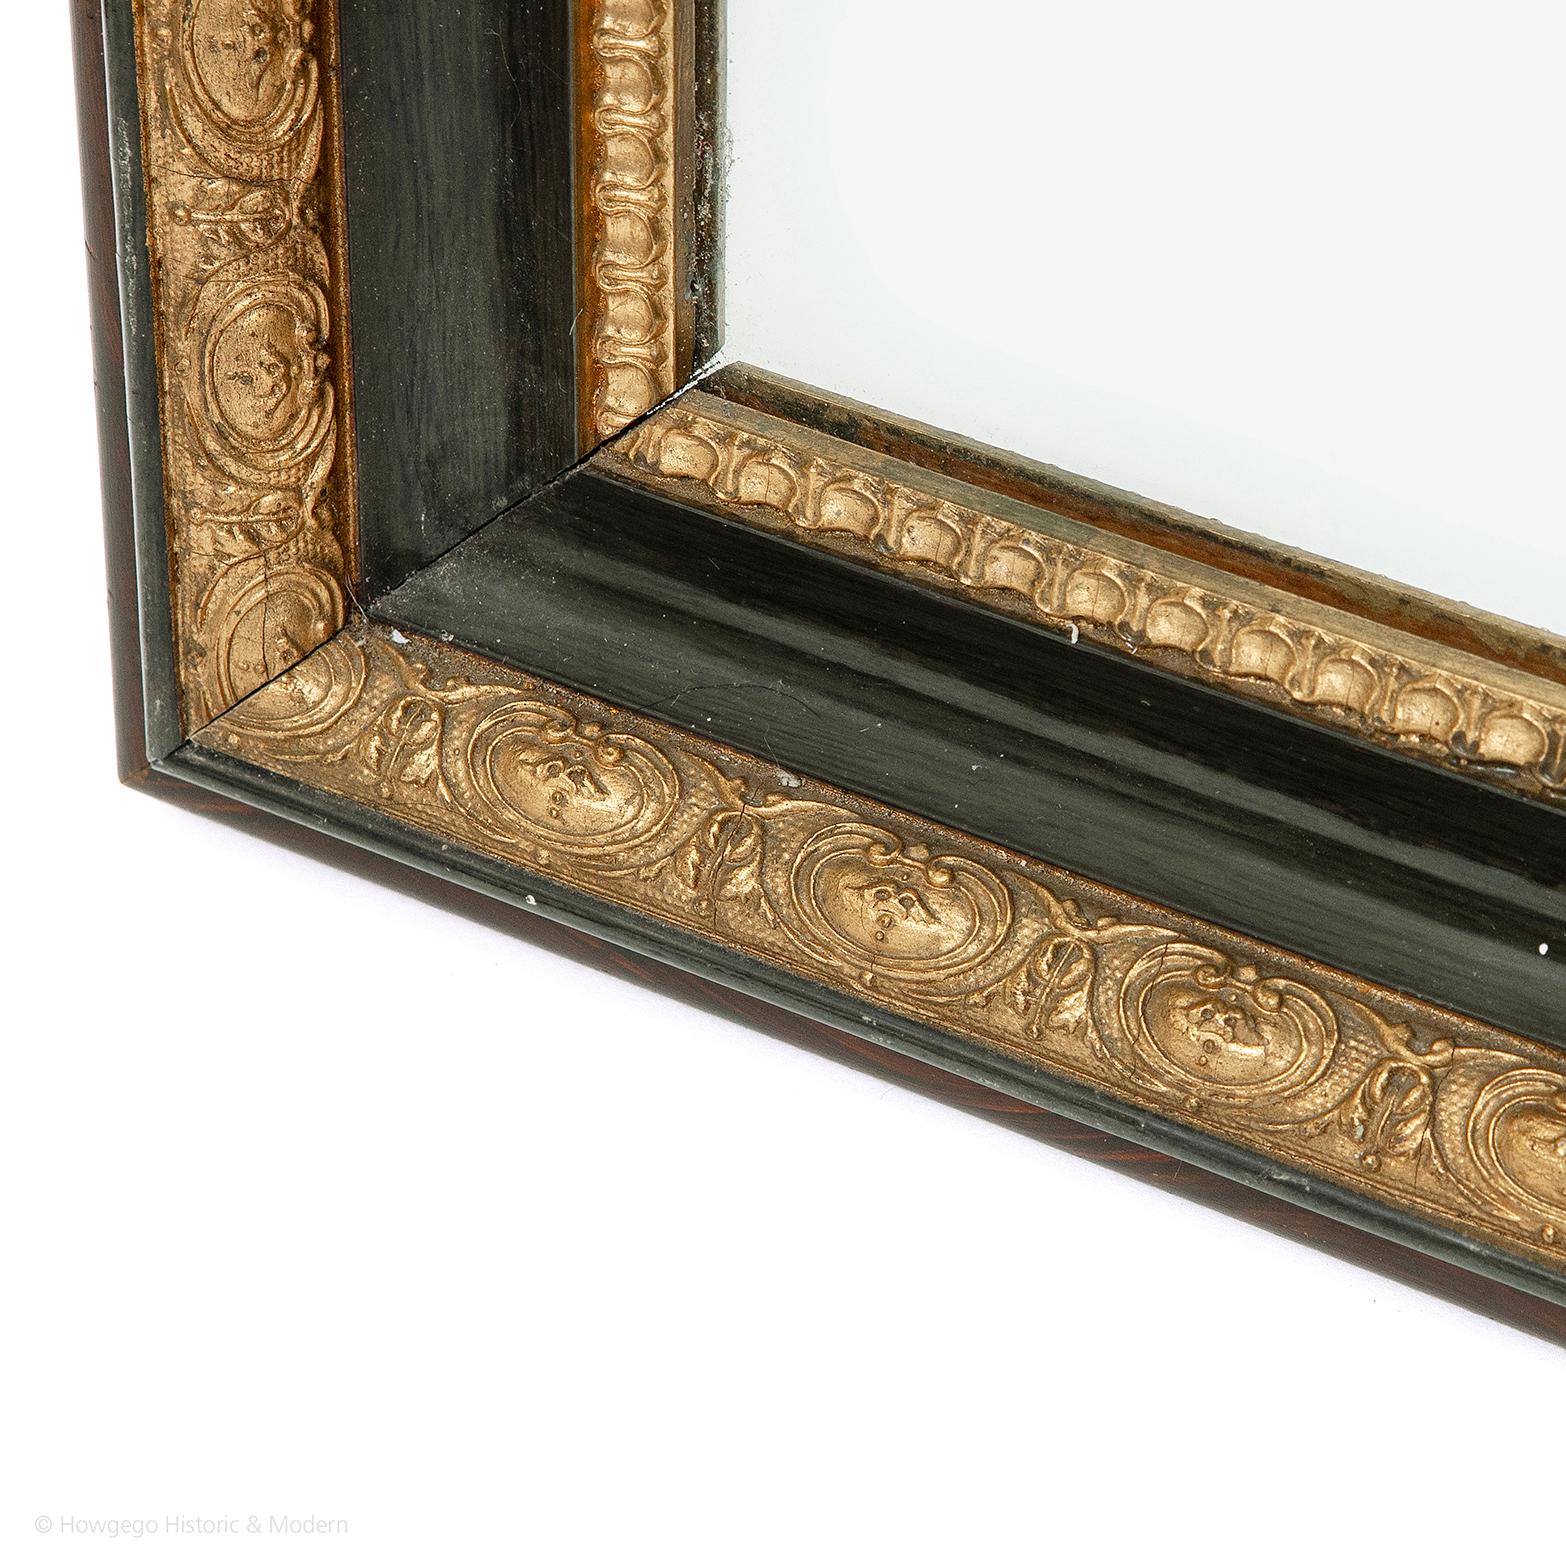 An early 19th century, green lacquered and woodgrained, neoclassical mirror with its original bevelled plate

The original bevelled plate surrounded by a gilded, moulded border. The cavetto frame with green lacquerwork decoration with fine